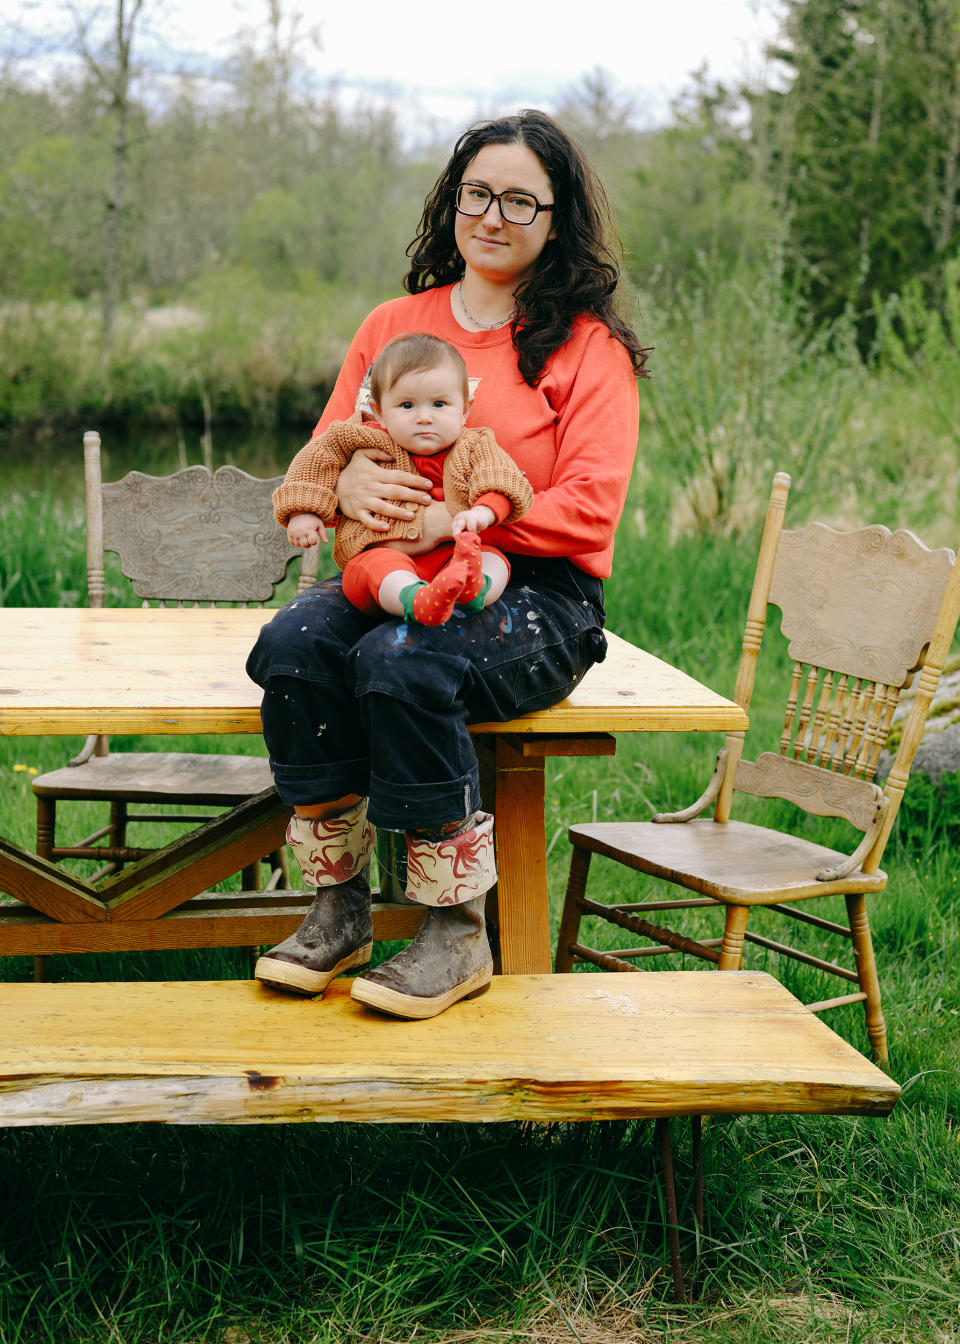 Frankie Krupa-Vahdani, 30, pictured with her daughter, who was born in August, 2021. (Courtesy Elizabeth Rudge)